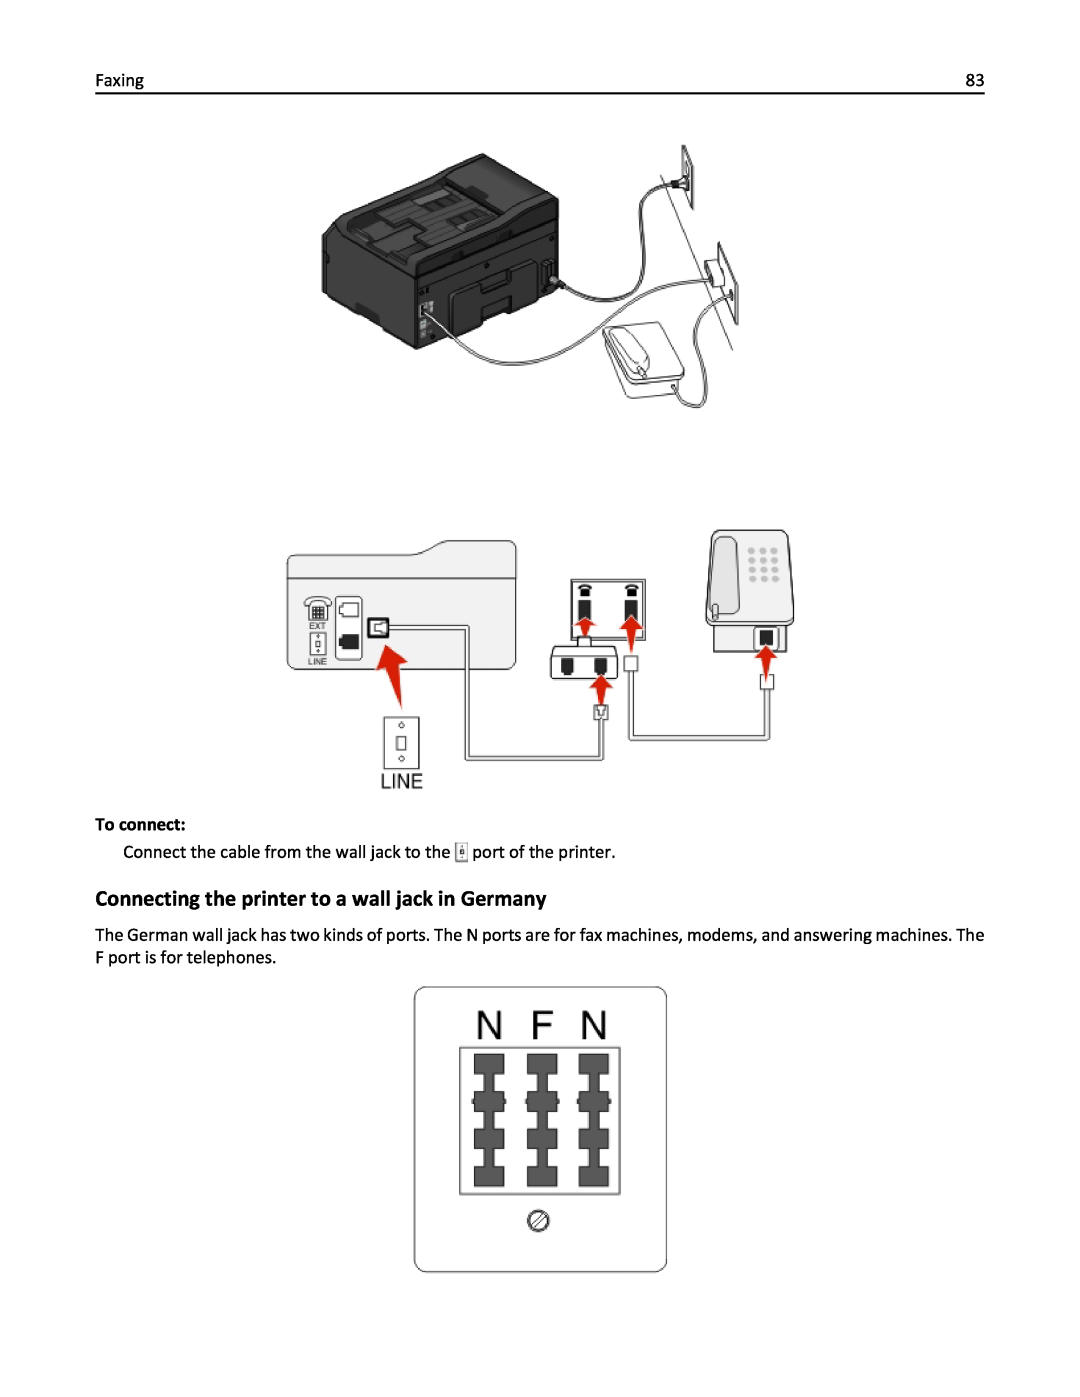 Lexmark 200, 20E manual Connecting the printer to a wall jack in Germany, Faxing, To connect 